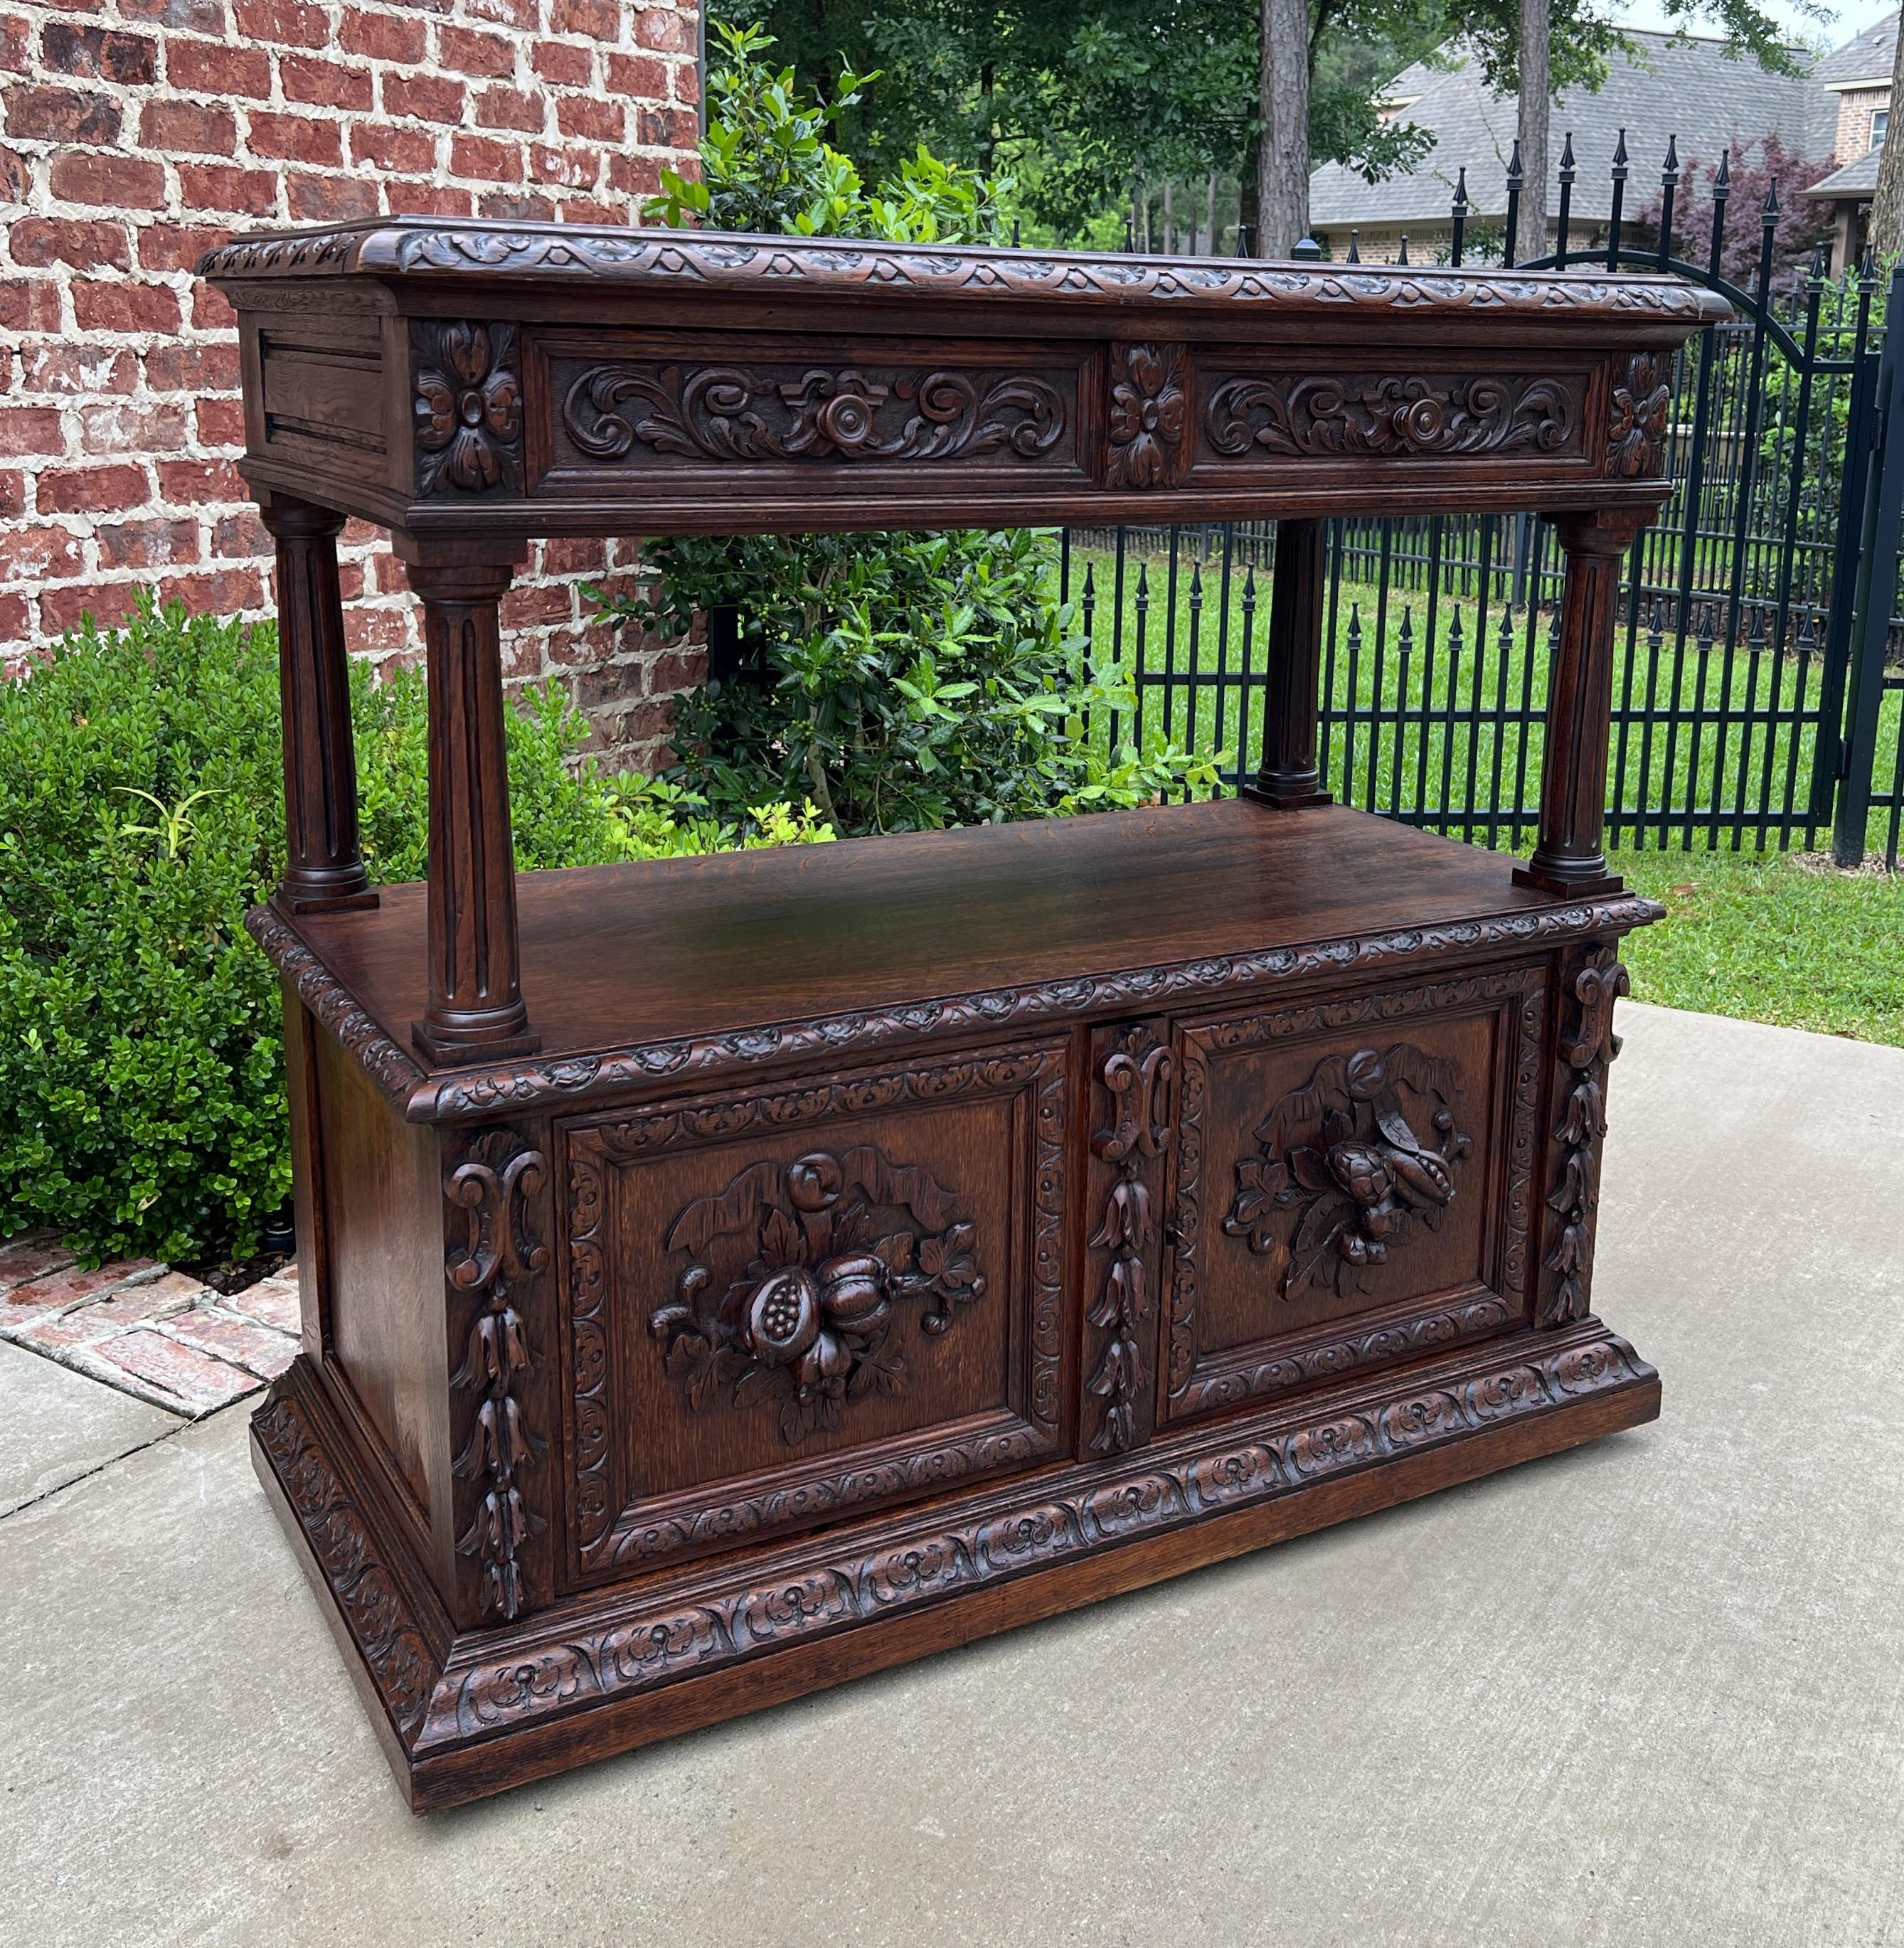 BEAUTIFUL Antique French Renaissance Revival Carved Oak 2-Tier Sideboard/Server, Console or Sofa Table~~c. 1880s

Superbly carved antique French Renaissance Revival oak sideboard or server~~so versatile~~could be used as an entry hall or foyer